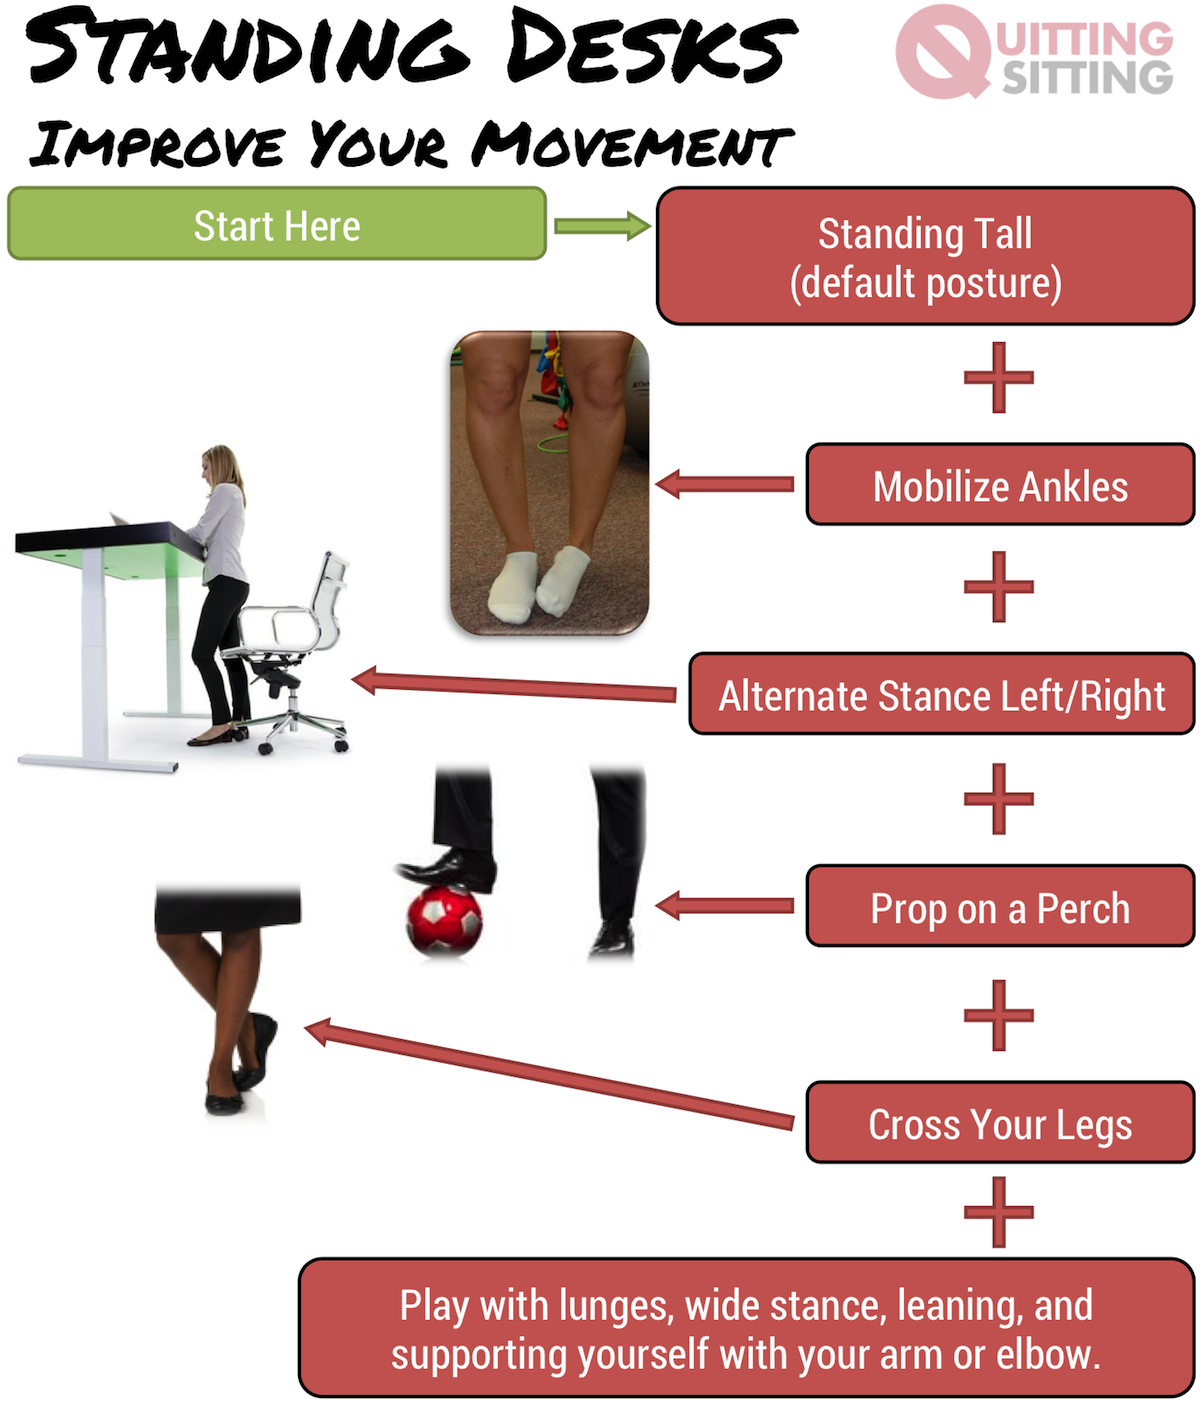 Quitting Sitting Transition Plan Improve Your Movement Accessory Postures